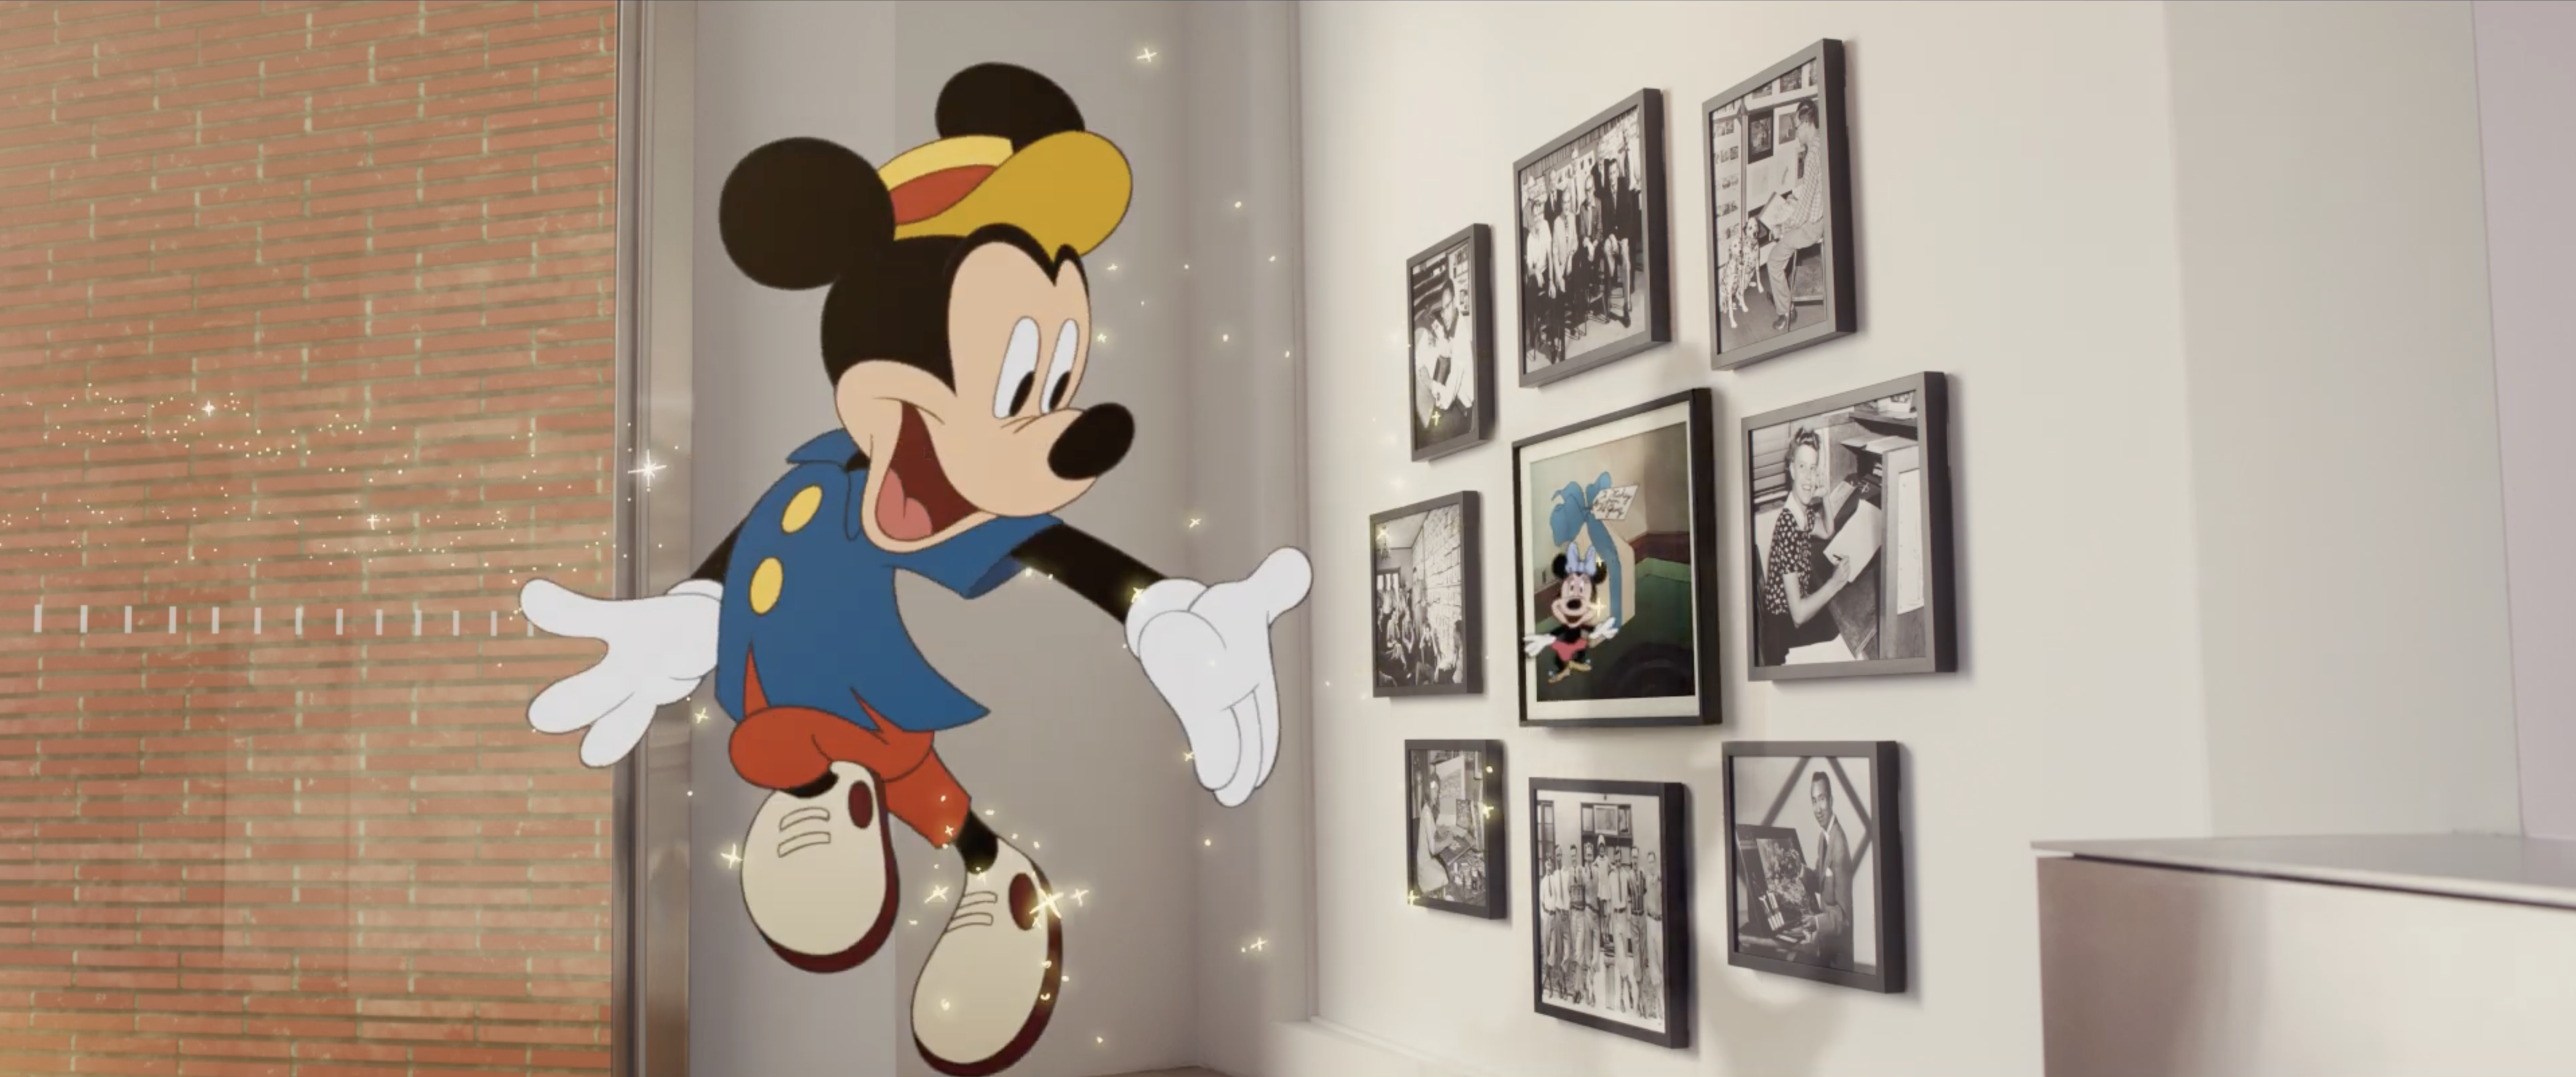 Mickey Mouse leaping out of a framed portrait on the wall of the Disney Animation Building in the upcoming short film "Once Upon A Studio"